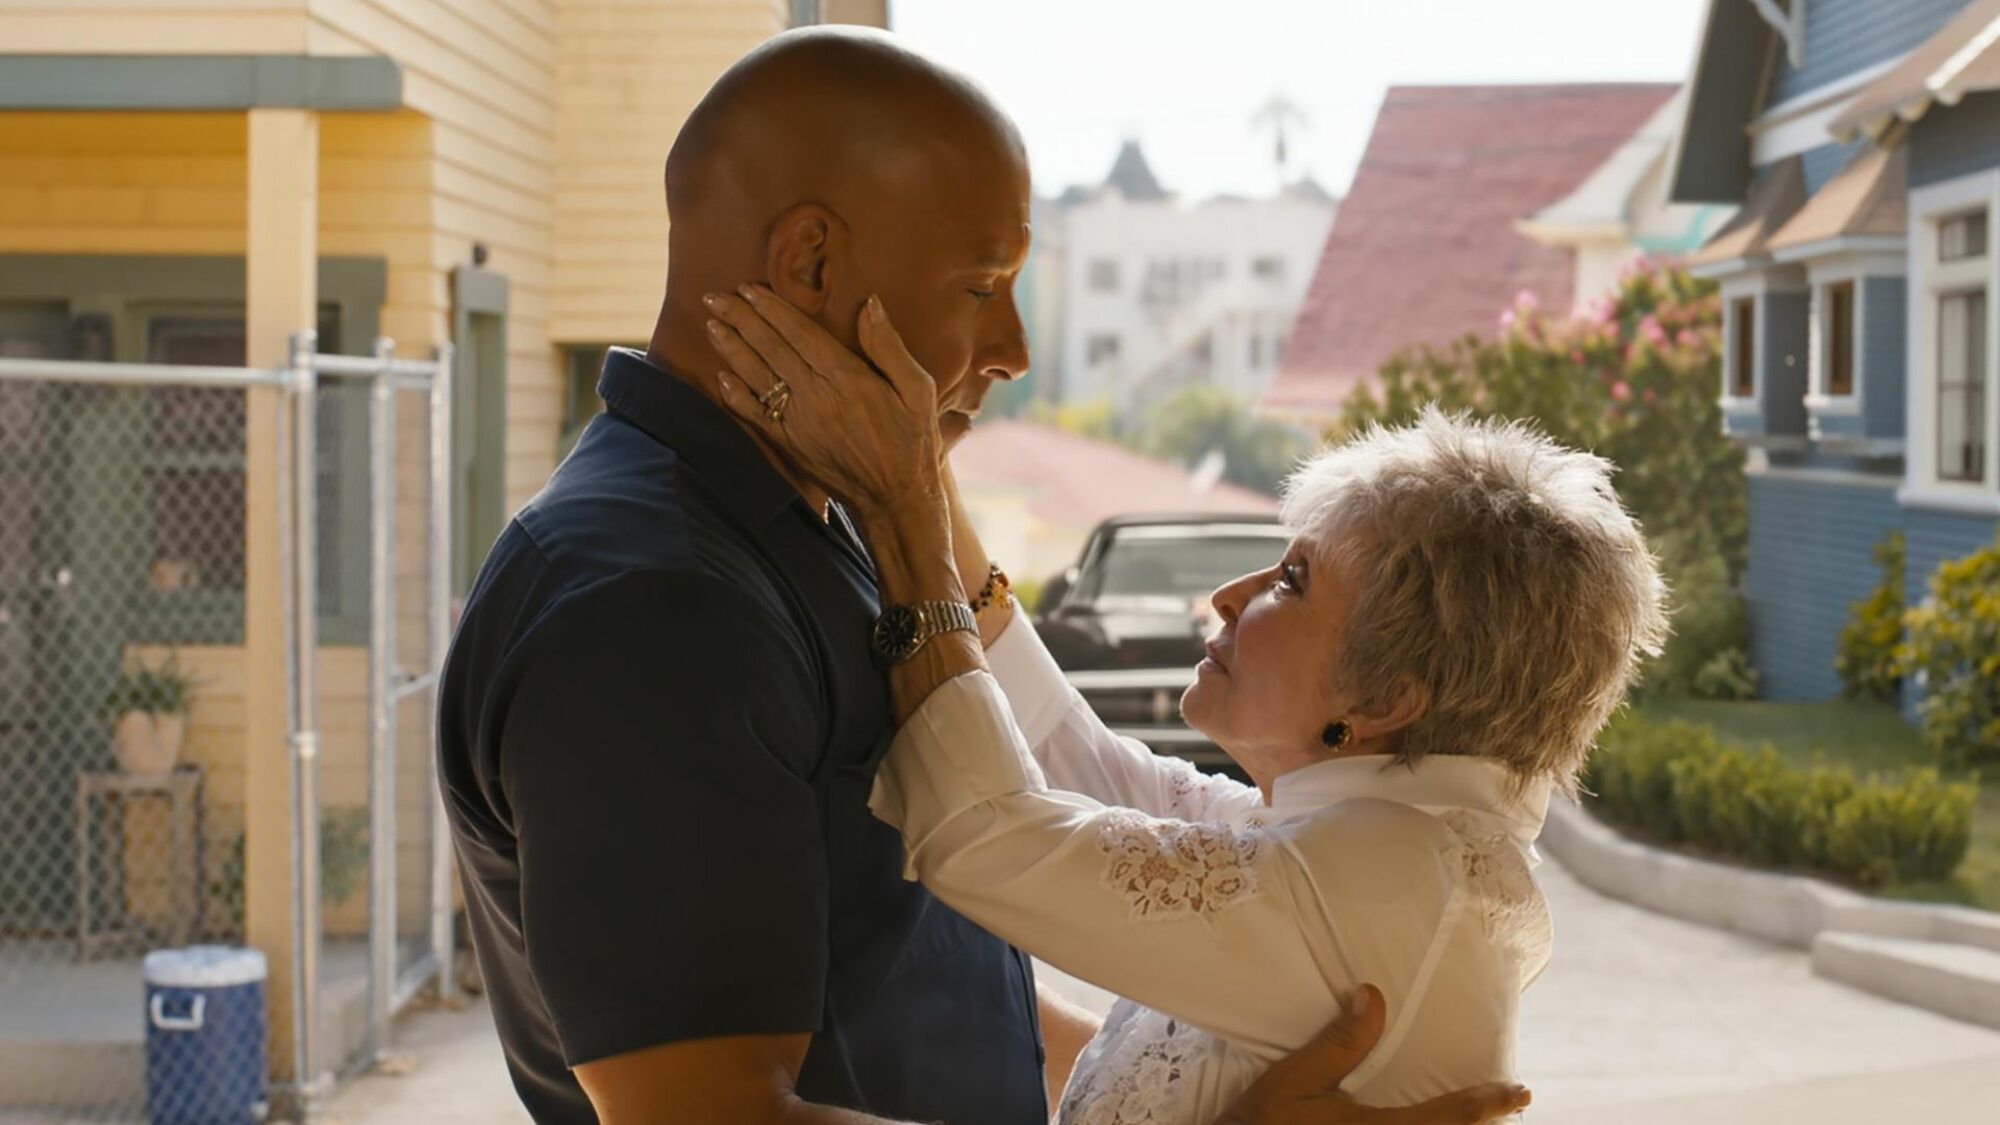 Rita Moreno and Vin Diesel play grandson and abuela in "Fast X."